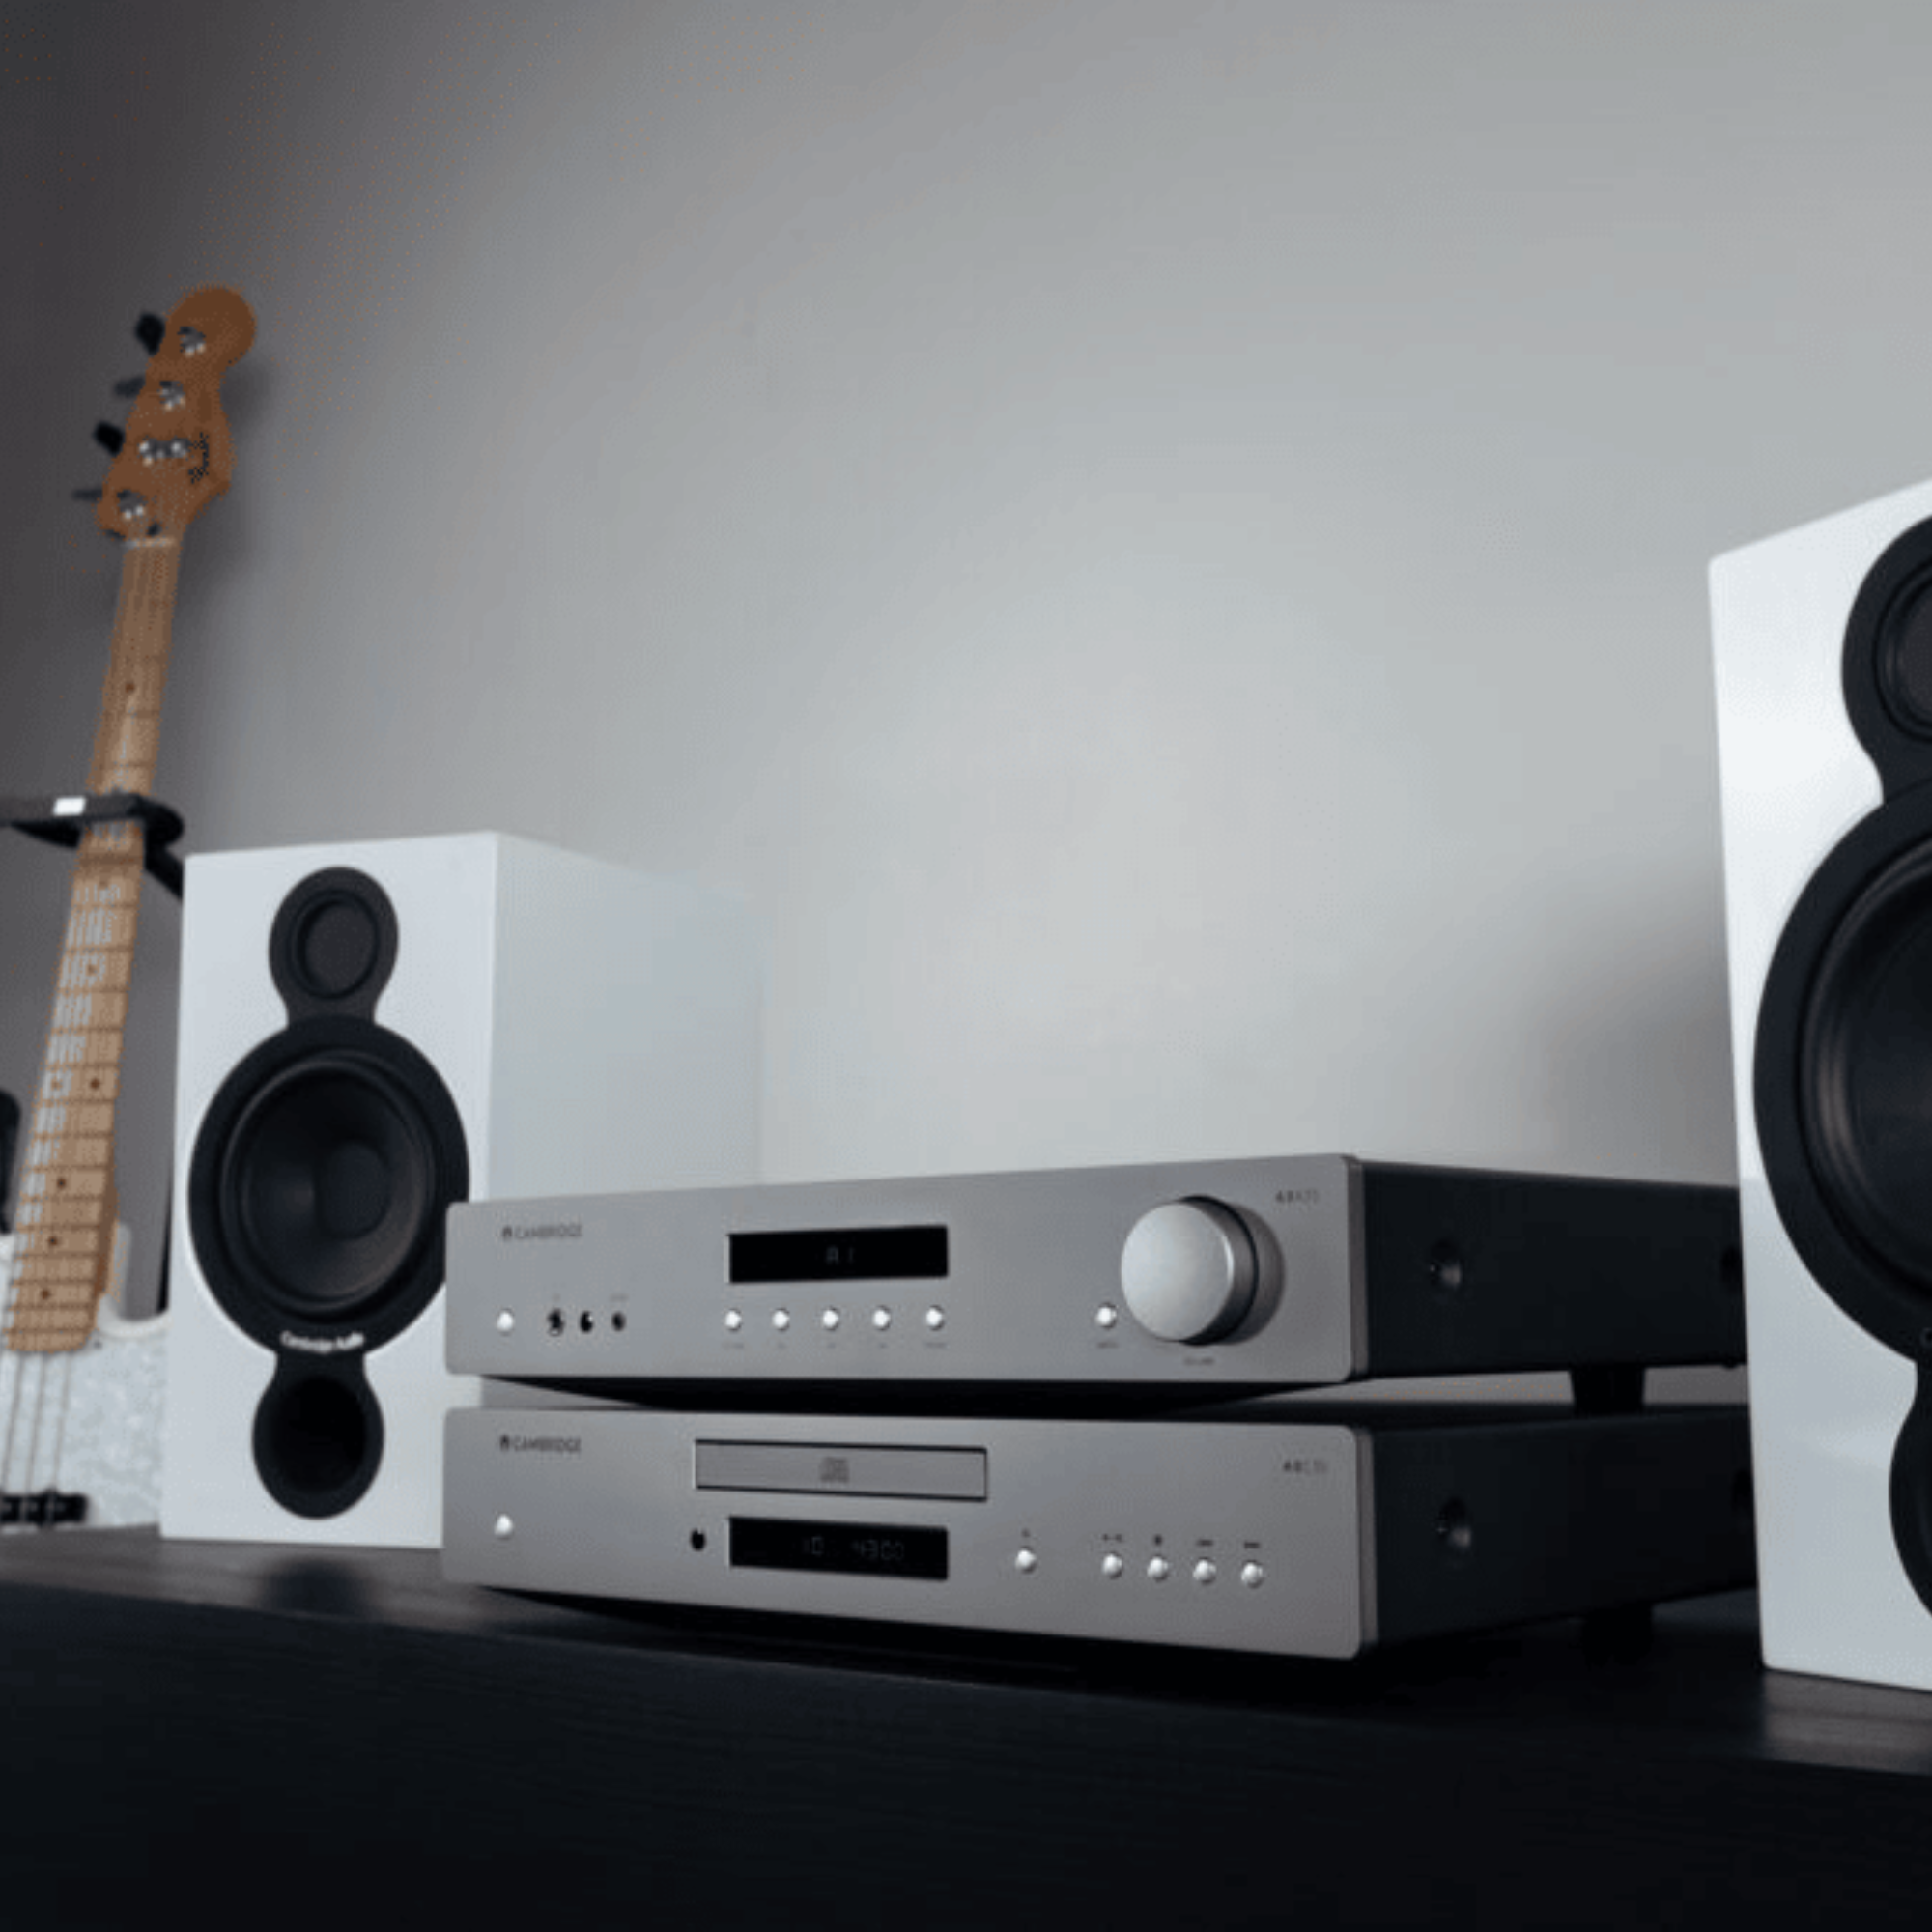 What Should I Look For When Buying a Stereo Amplifier?